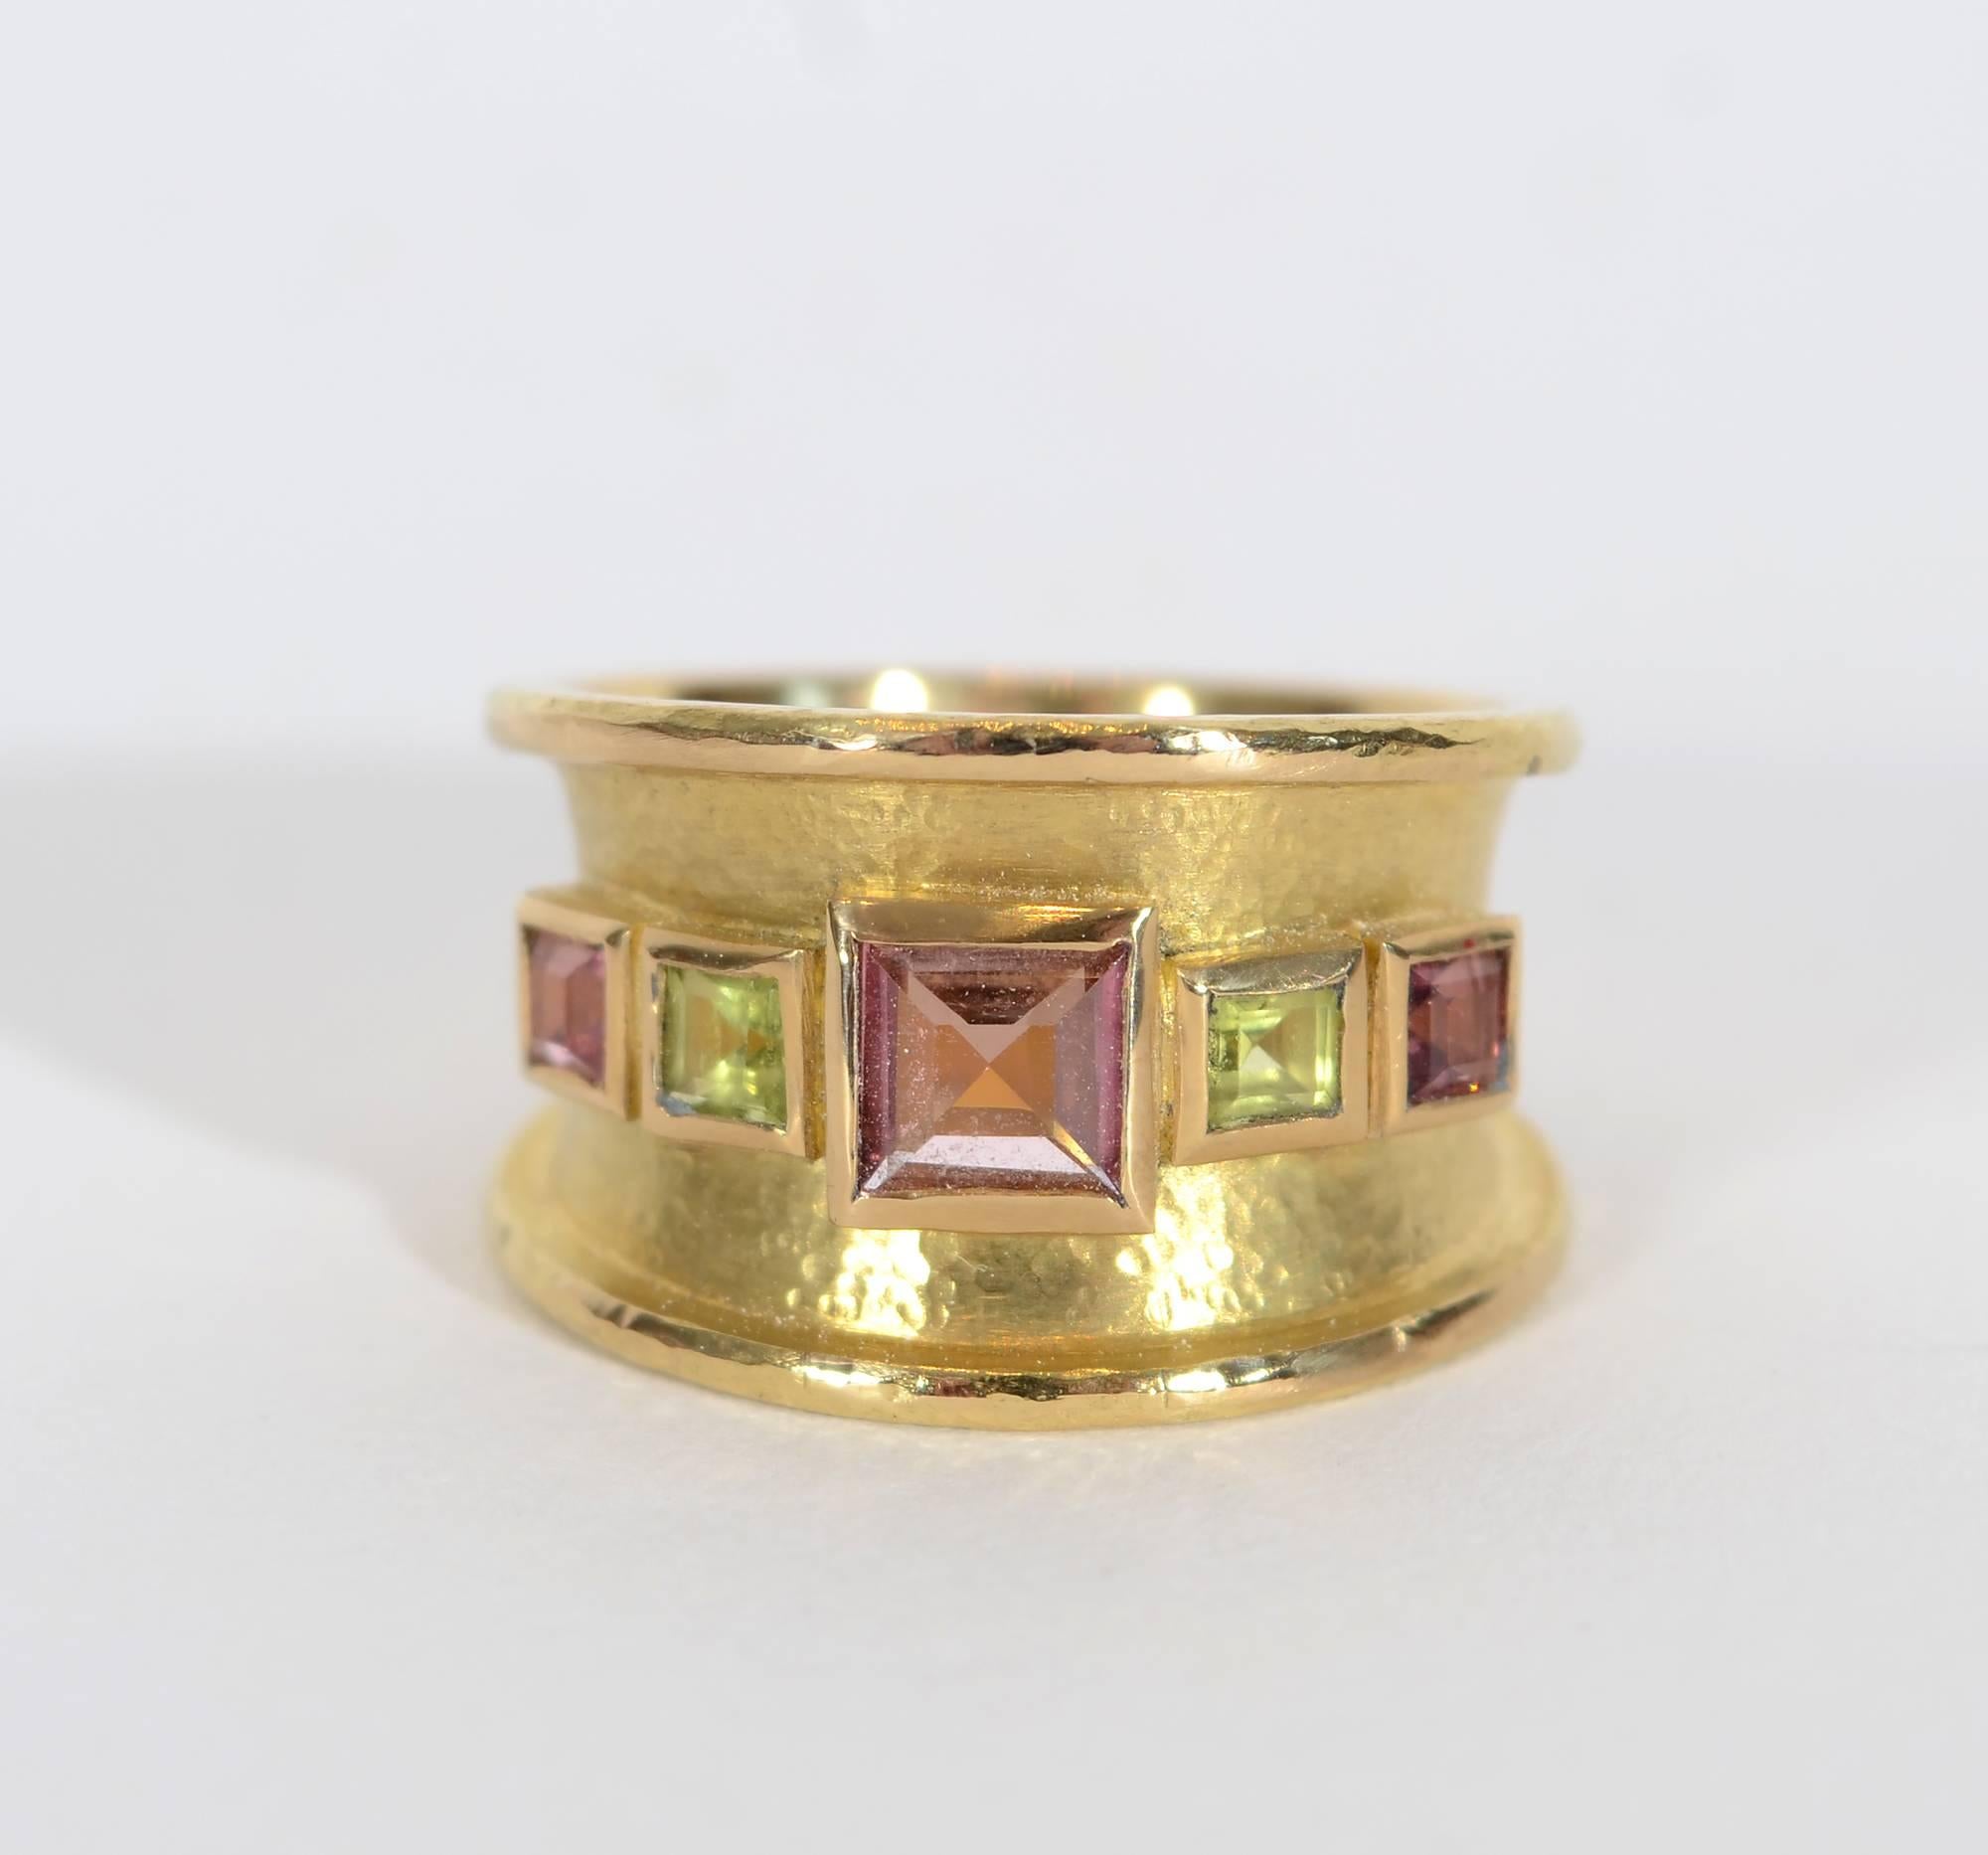 Elizabeth Locke wide band ring with alternating tourmaline and peridot. The band is 1/2" at the front tapering to 1/4" in the back making it both graceful and very comfortable to wear. The central stone is 3/8" square. The surface of